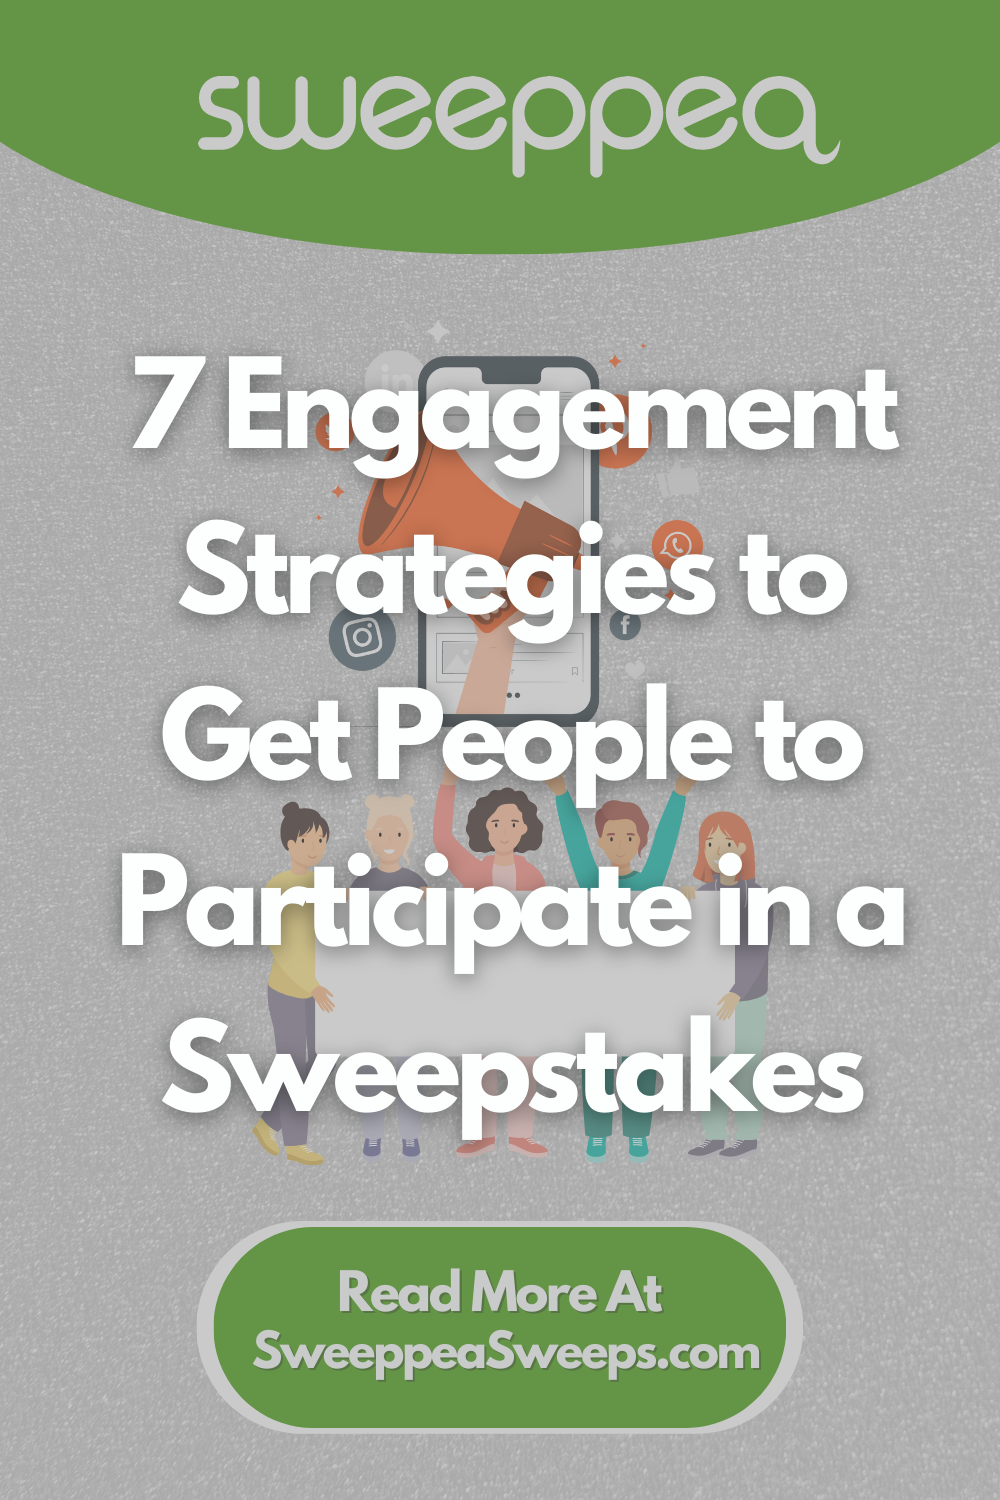 7 Engagement Strategies to Get People to Participate in a Sweepstakes